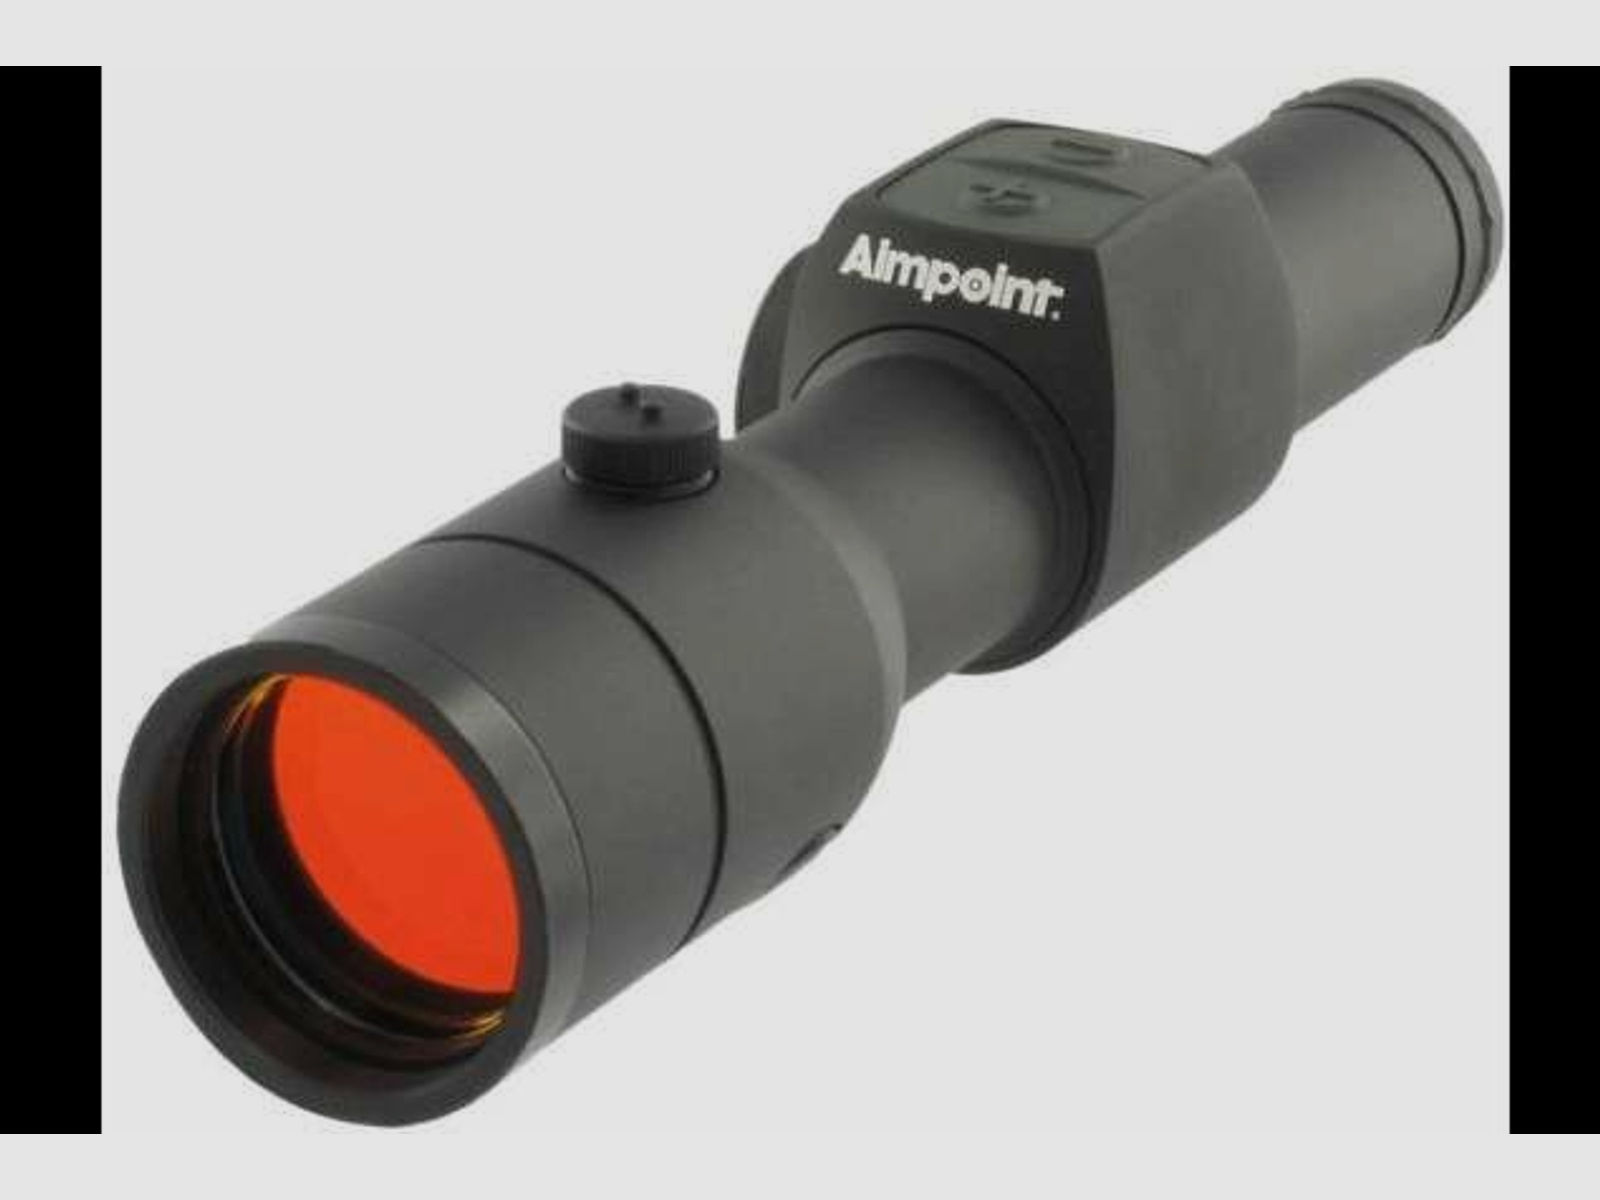 Aimpoint	 Aimpoint Zielfernrohr  H30S Abs.2MOA